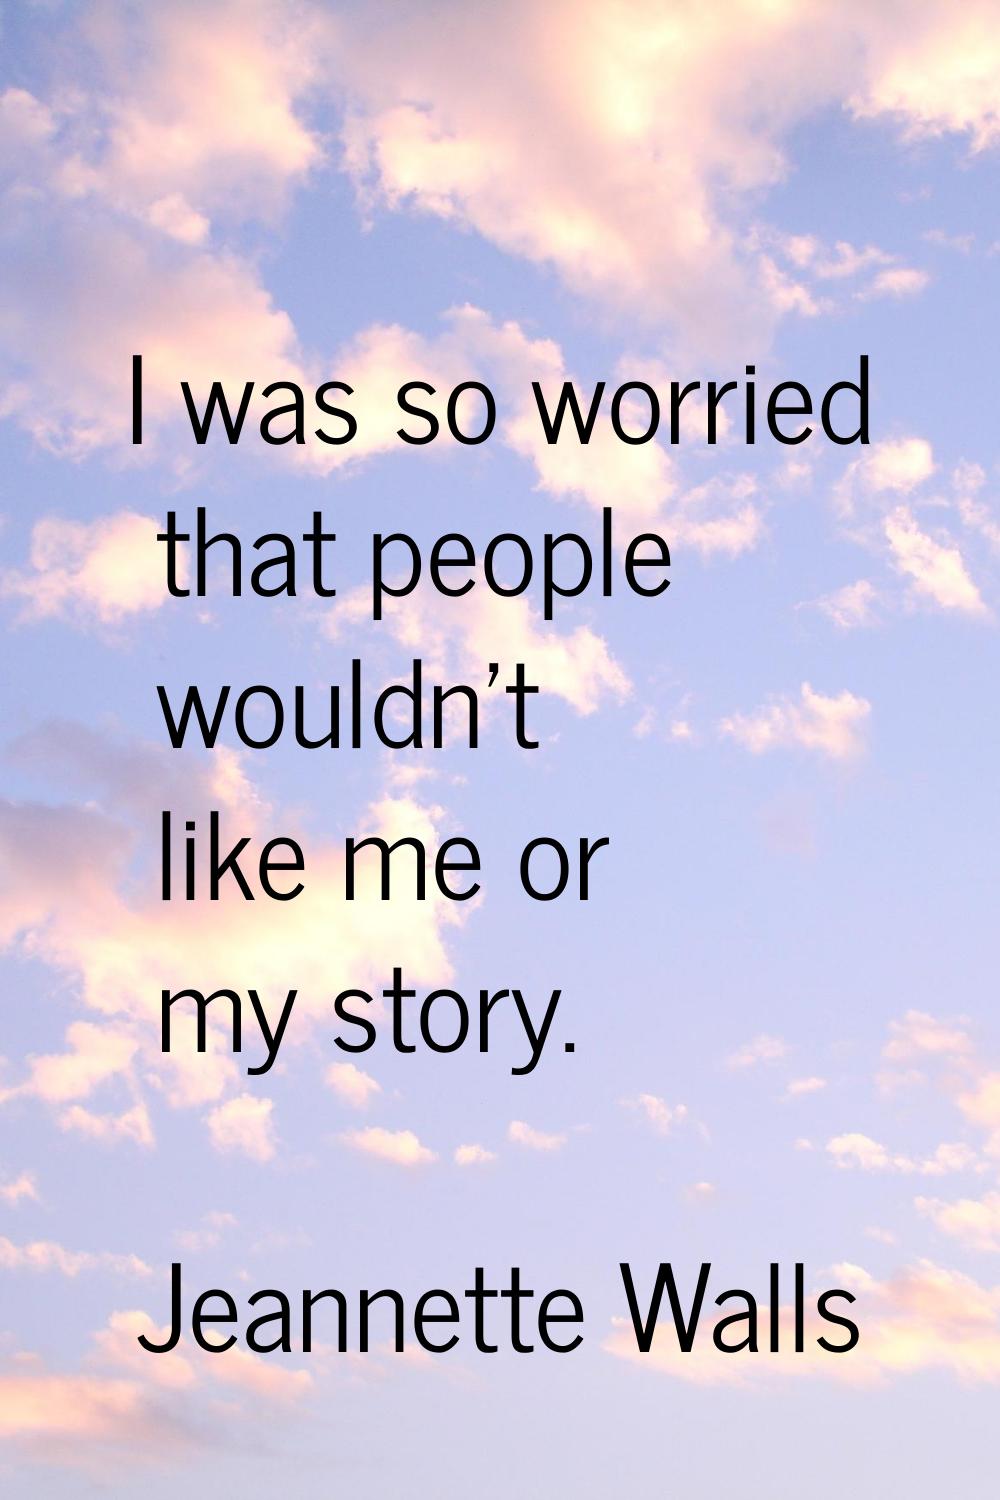 I was so worried that people wouldn't like me or my story.